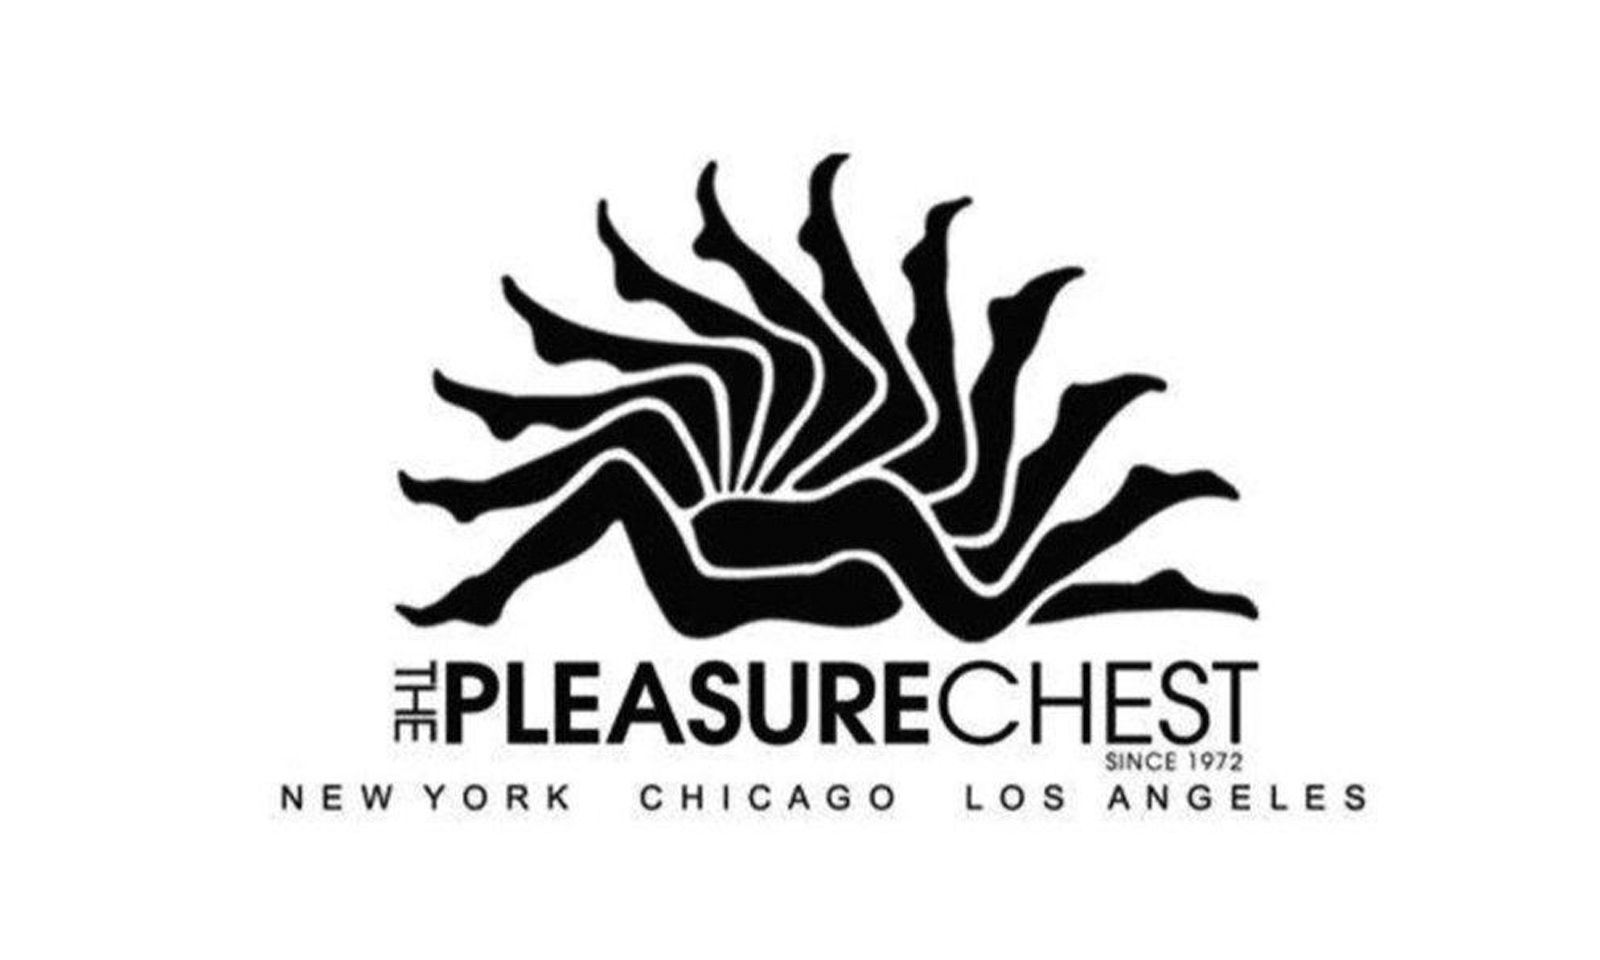 Pleasure Chest Plans In-Store, Outreach Events for L.A. Pride